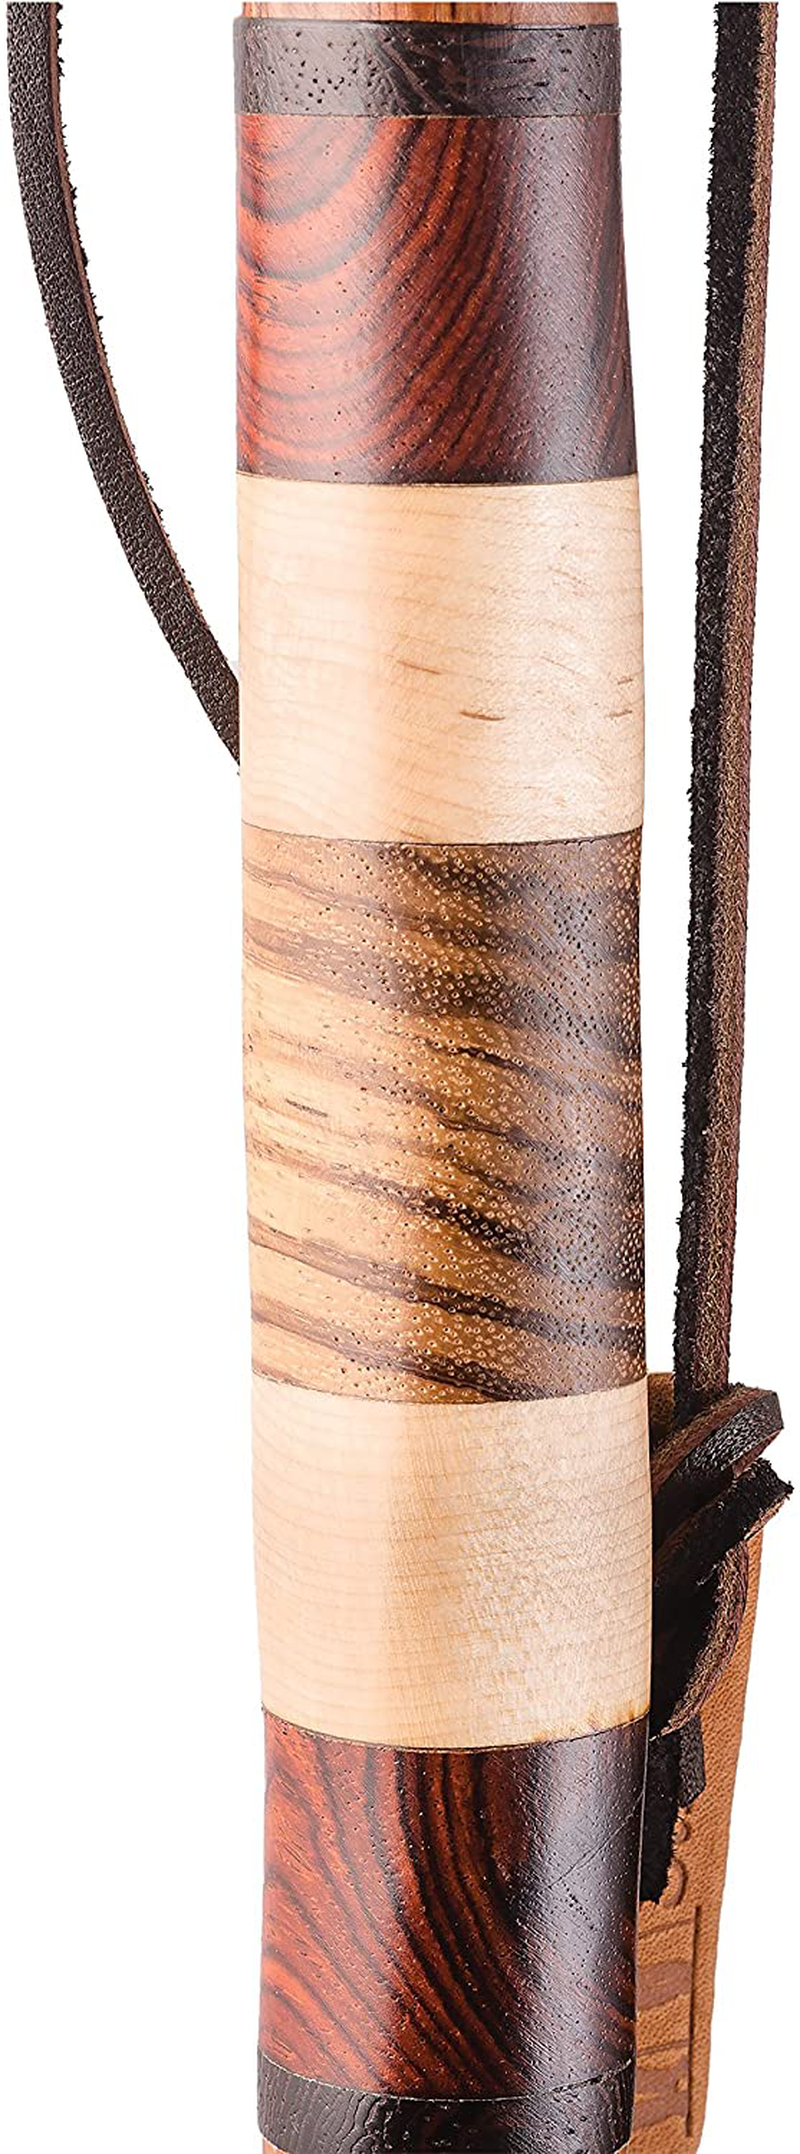 Hiking Walking Trekking Stick - Handcrafted Wooden Walking & Hiking Stick - Made in the USA by Brazos - Safari Hickory Ebony - 55 Inches